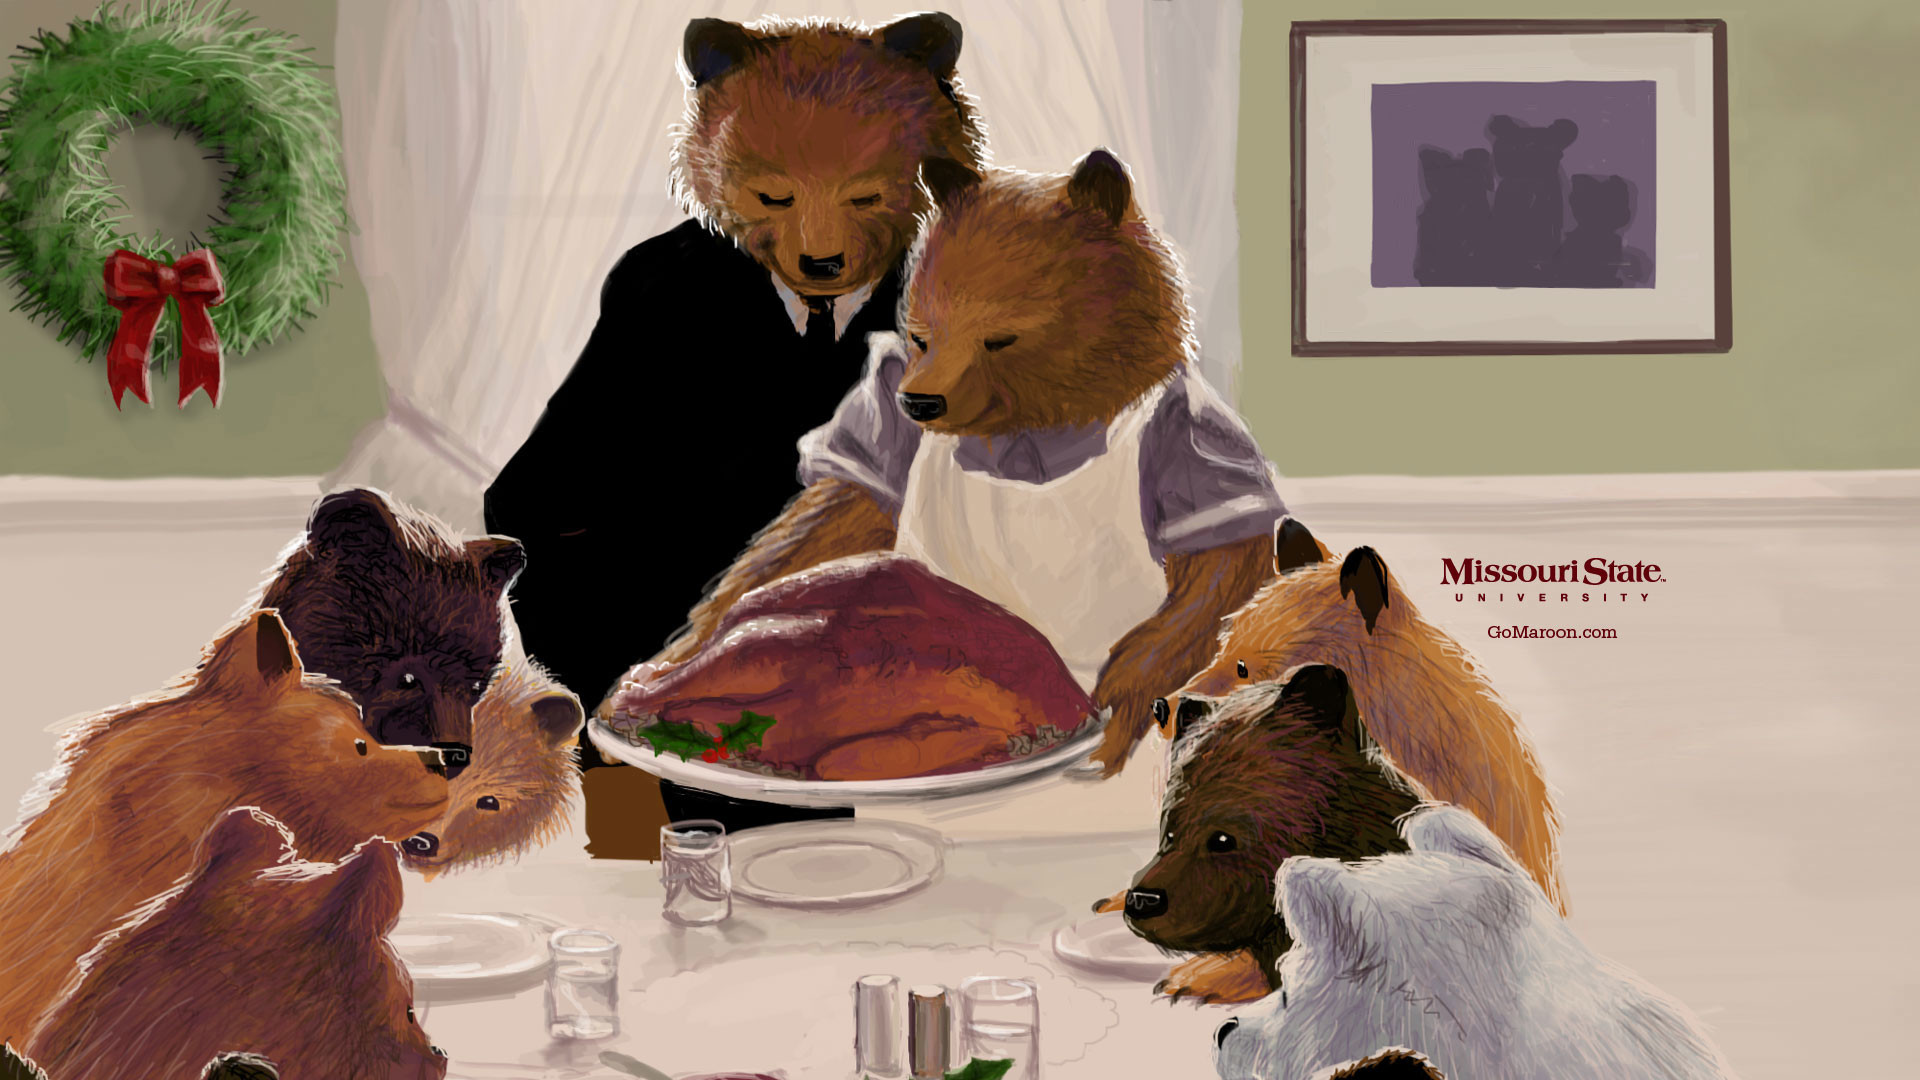 1920x1080 drawing of Bears gathered around a table with a turkey. Missouri State  University GoMaroon.